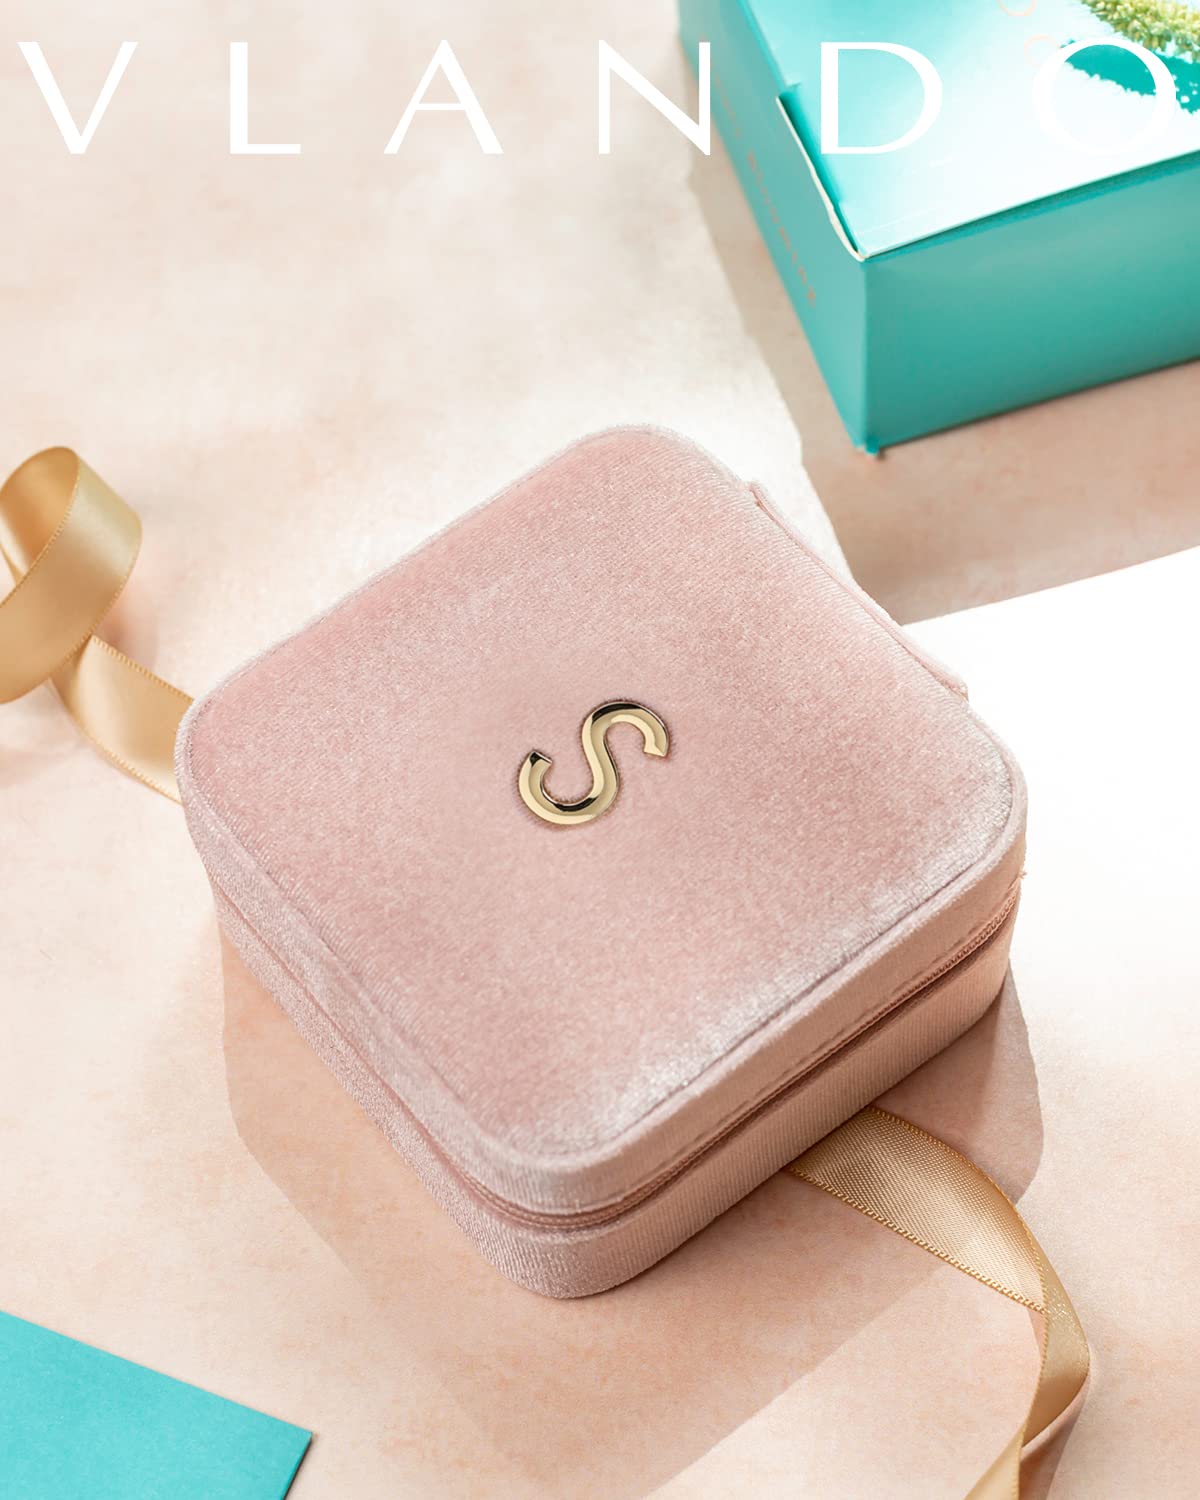 Personalized Letter Small Jewelry Box, Travel Jewelry Case